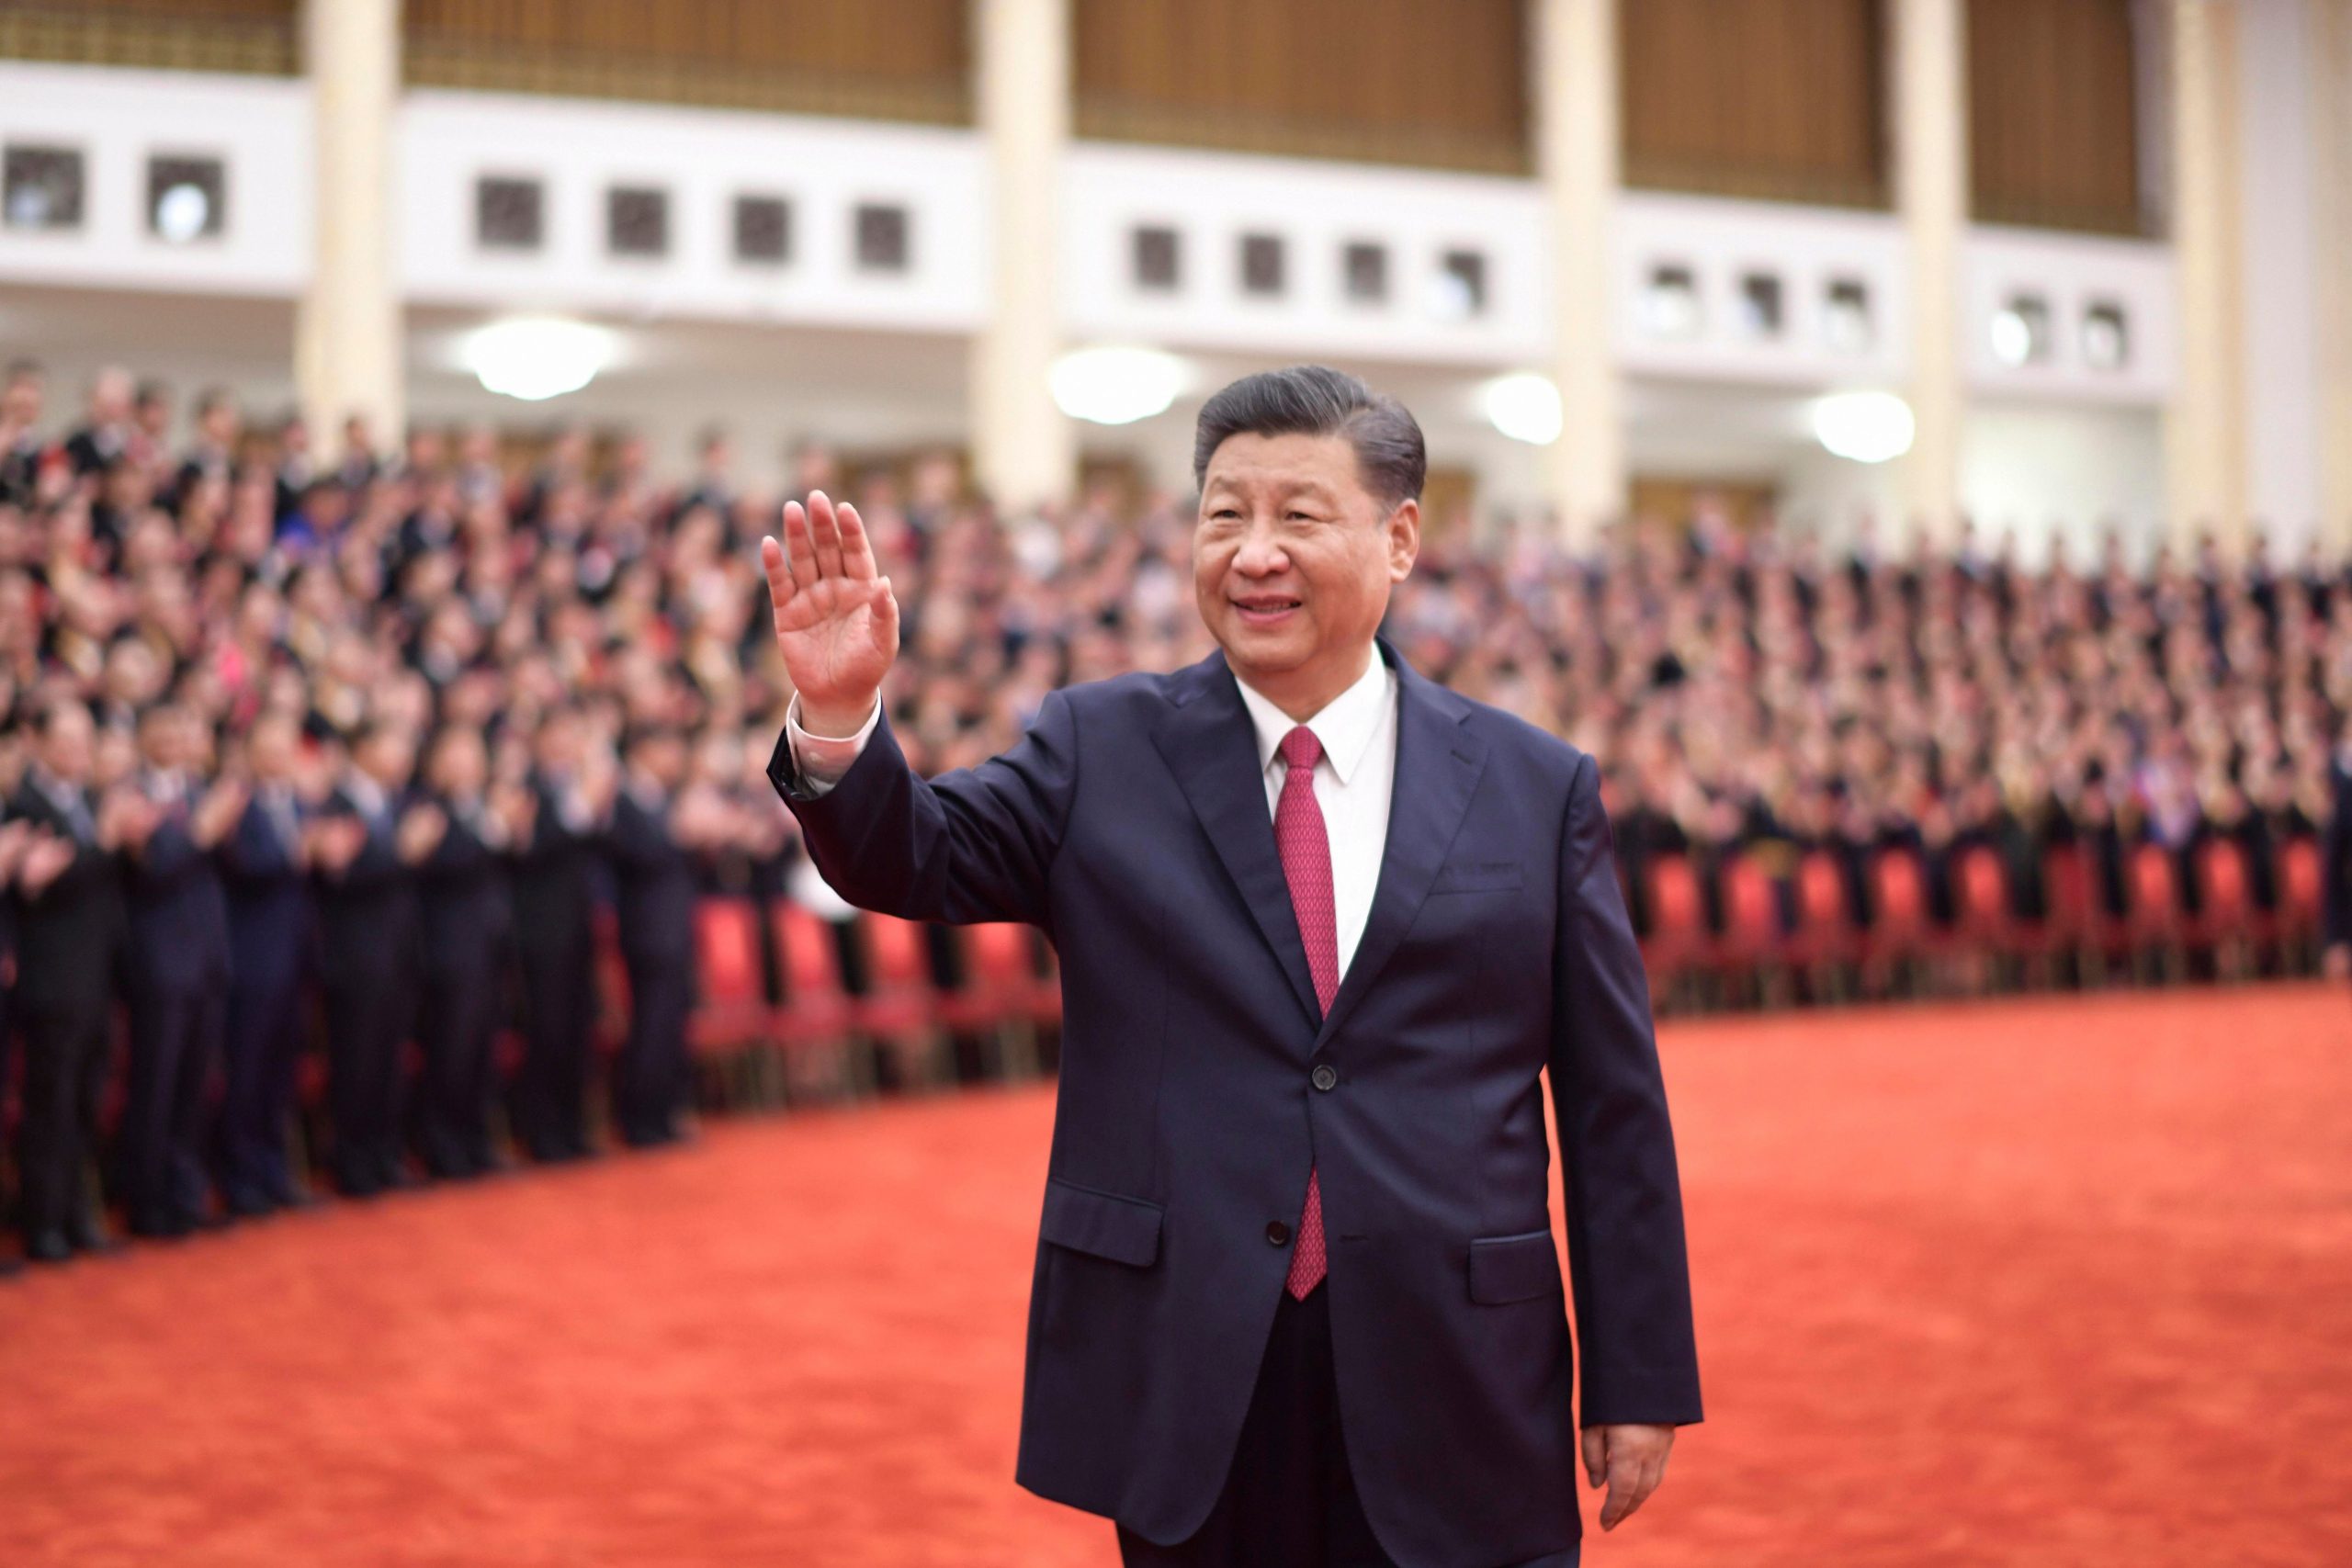 Xi hails ‘irreversible’ rise of China at 100th birthday of Communist Party